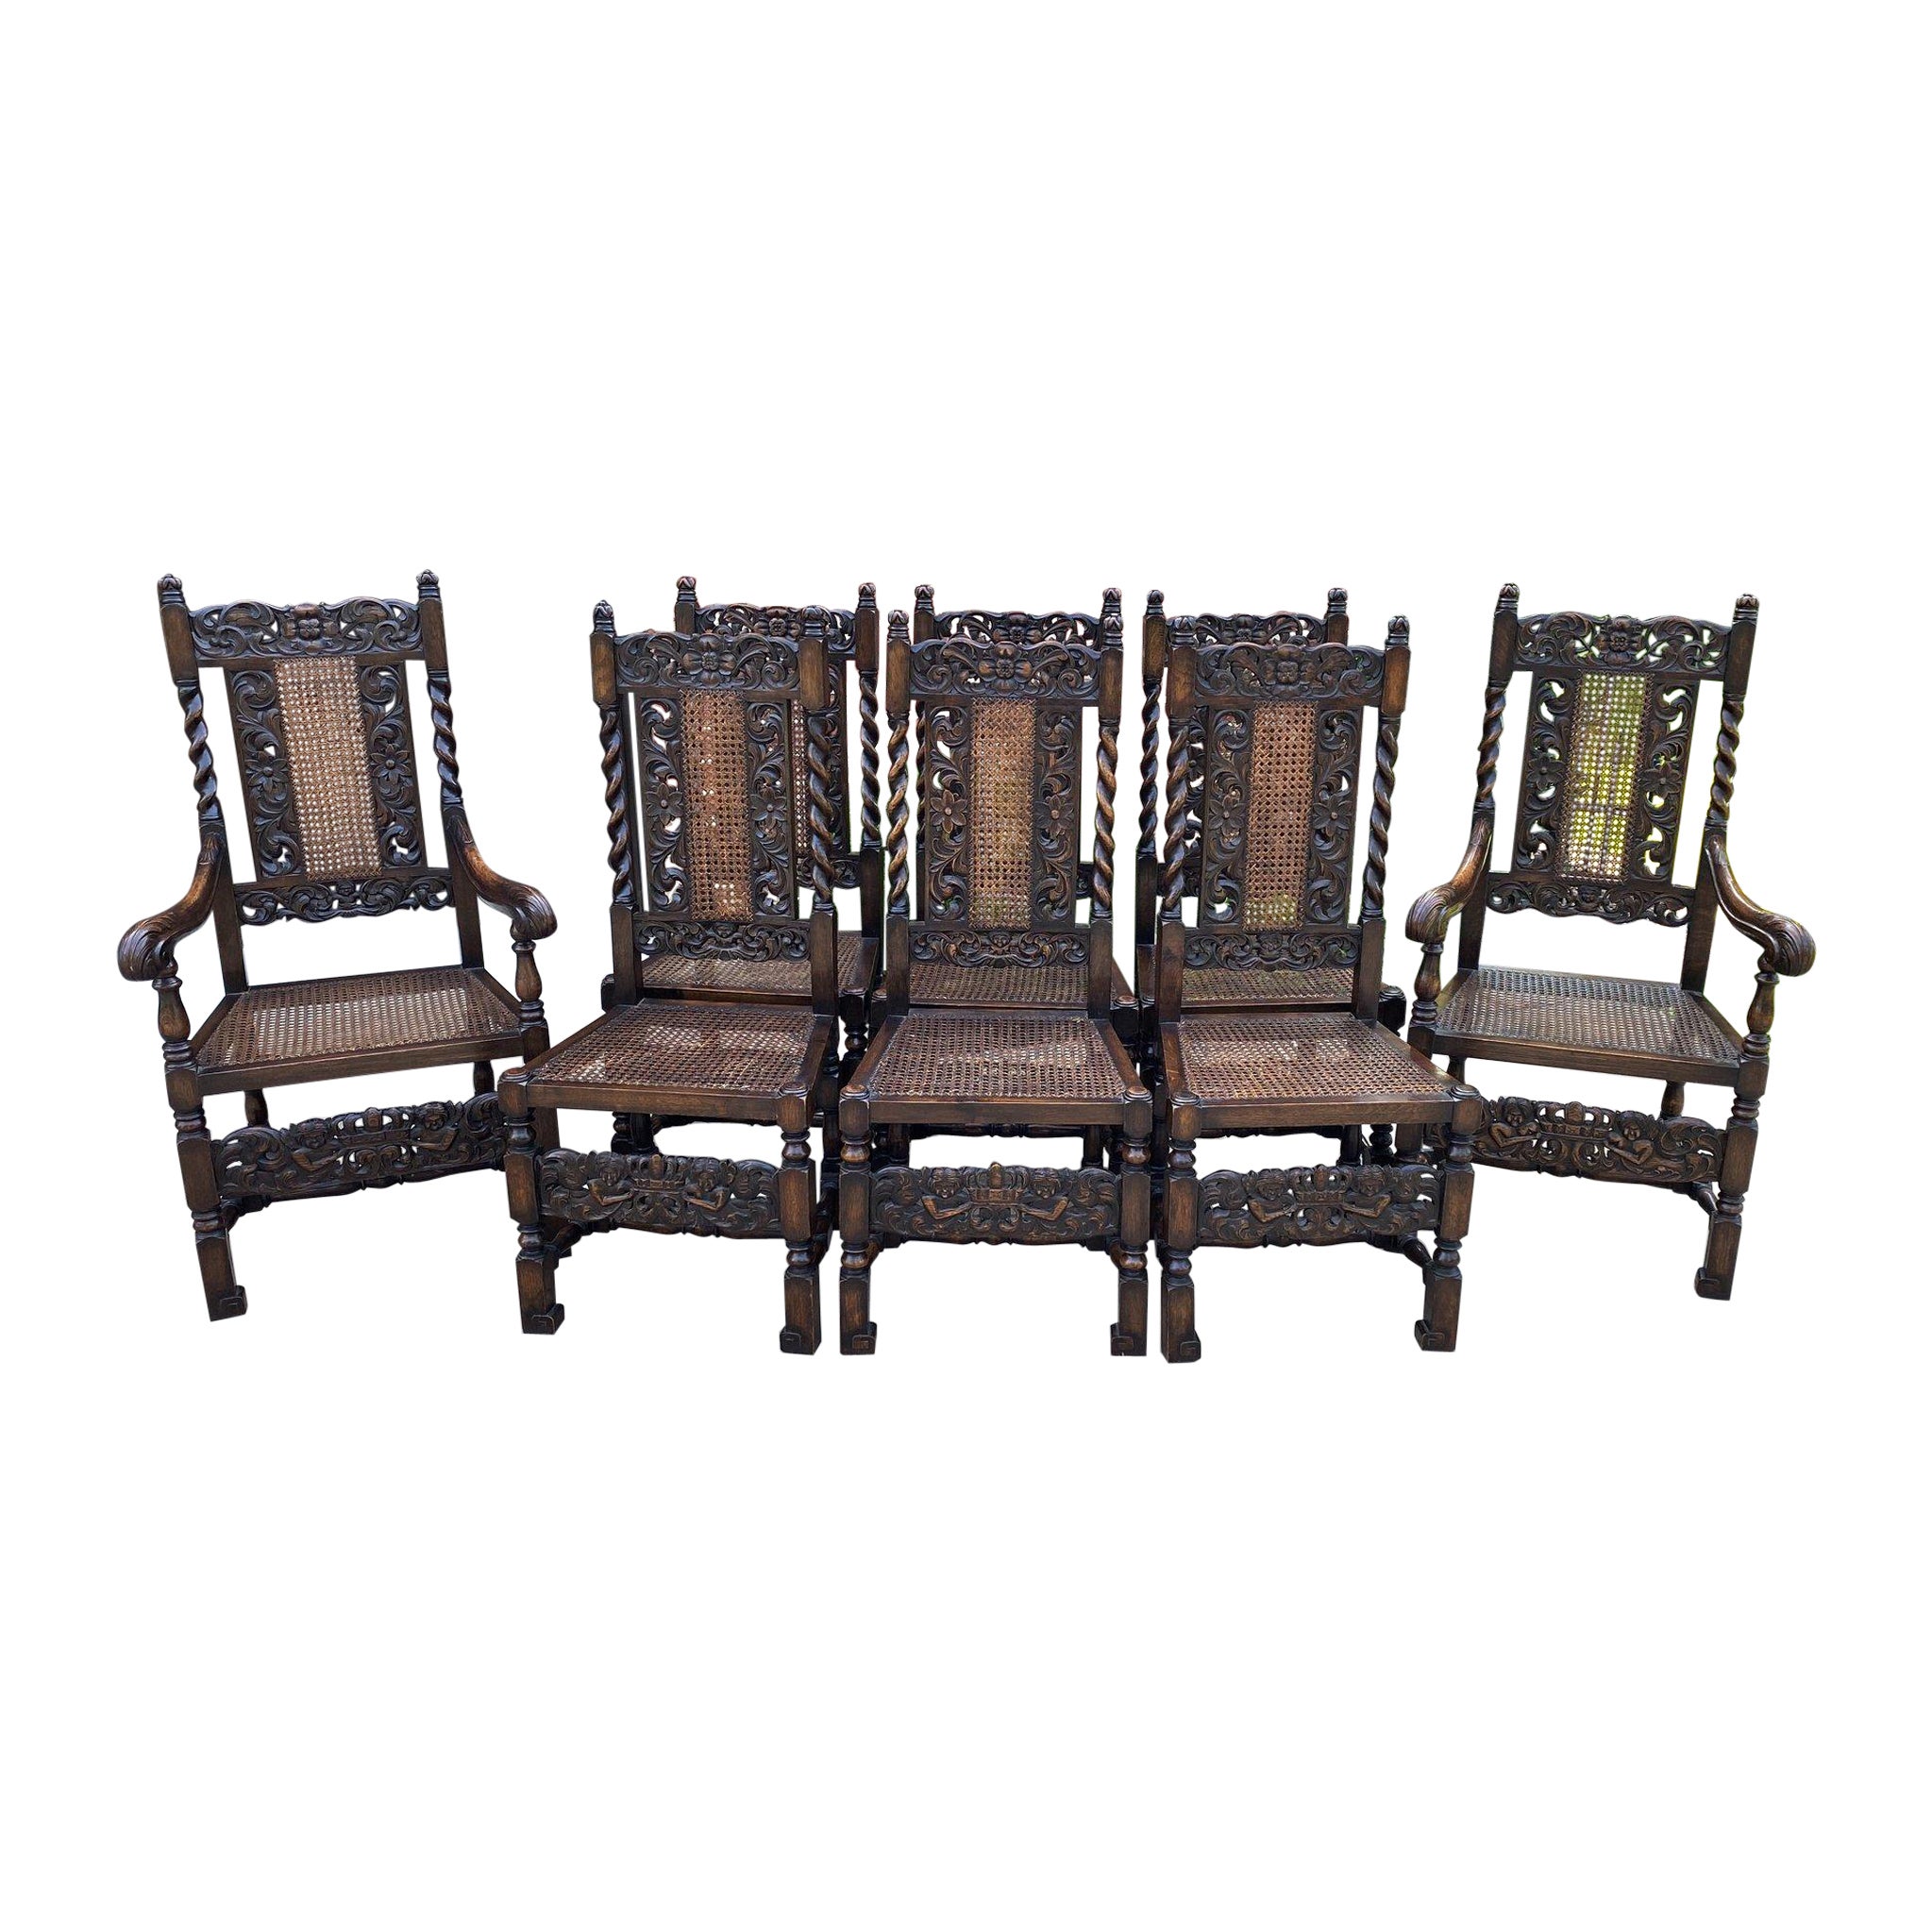 Antique English Chairs Set of 8 Barley Twist Caned Oak Dining Chairs Seating